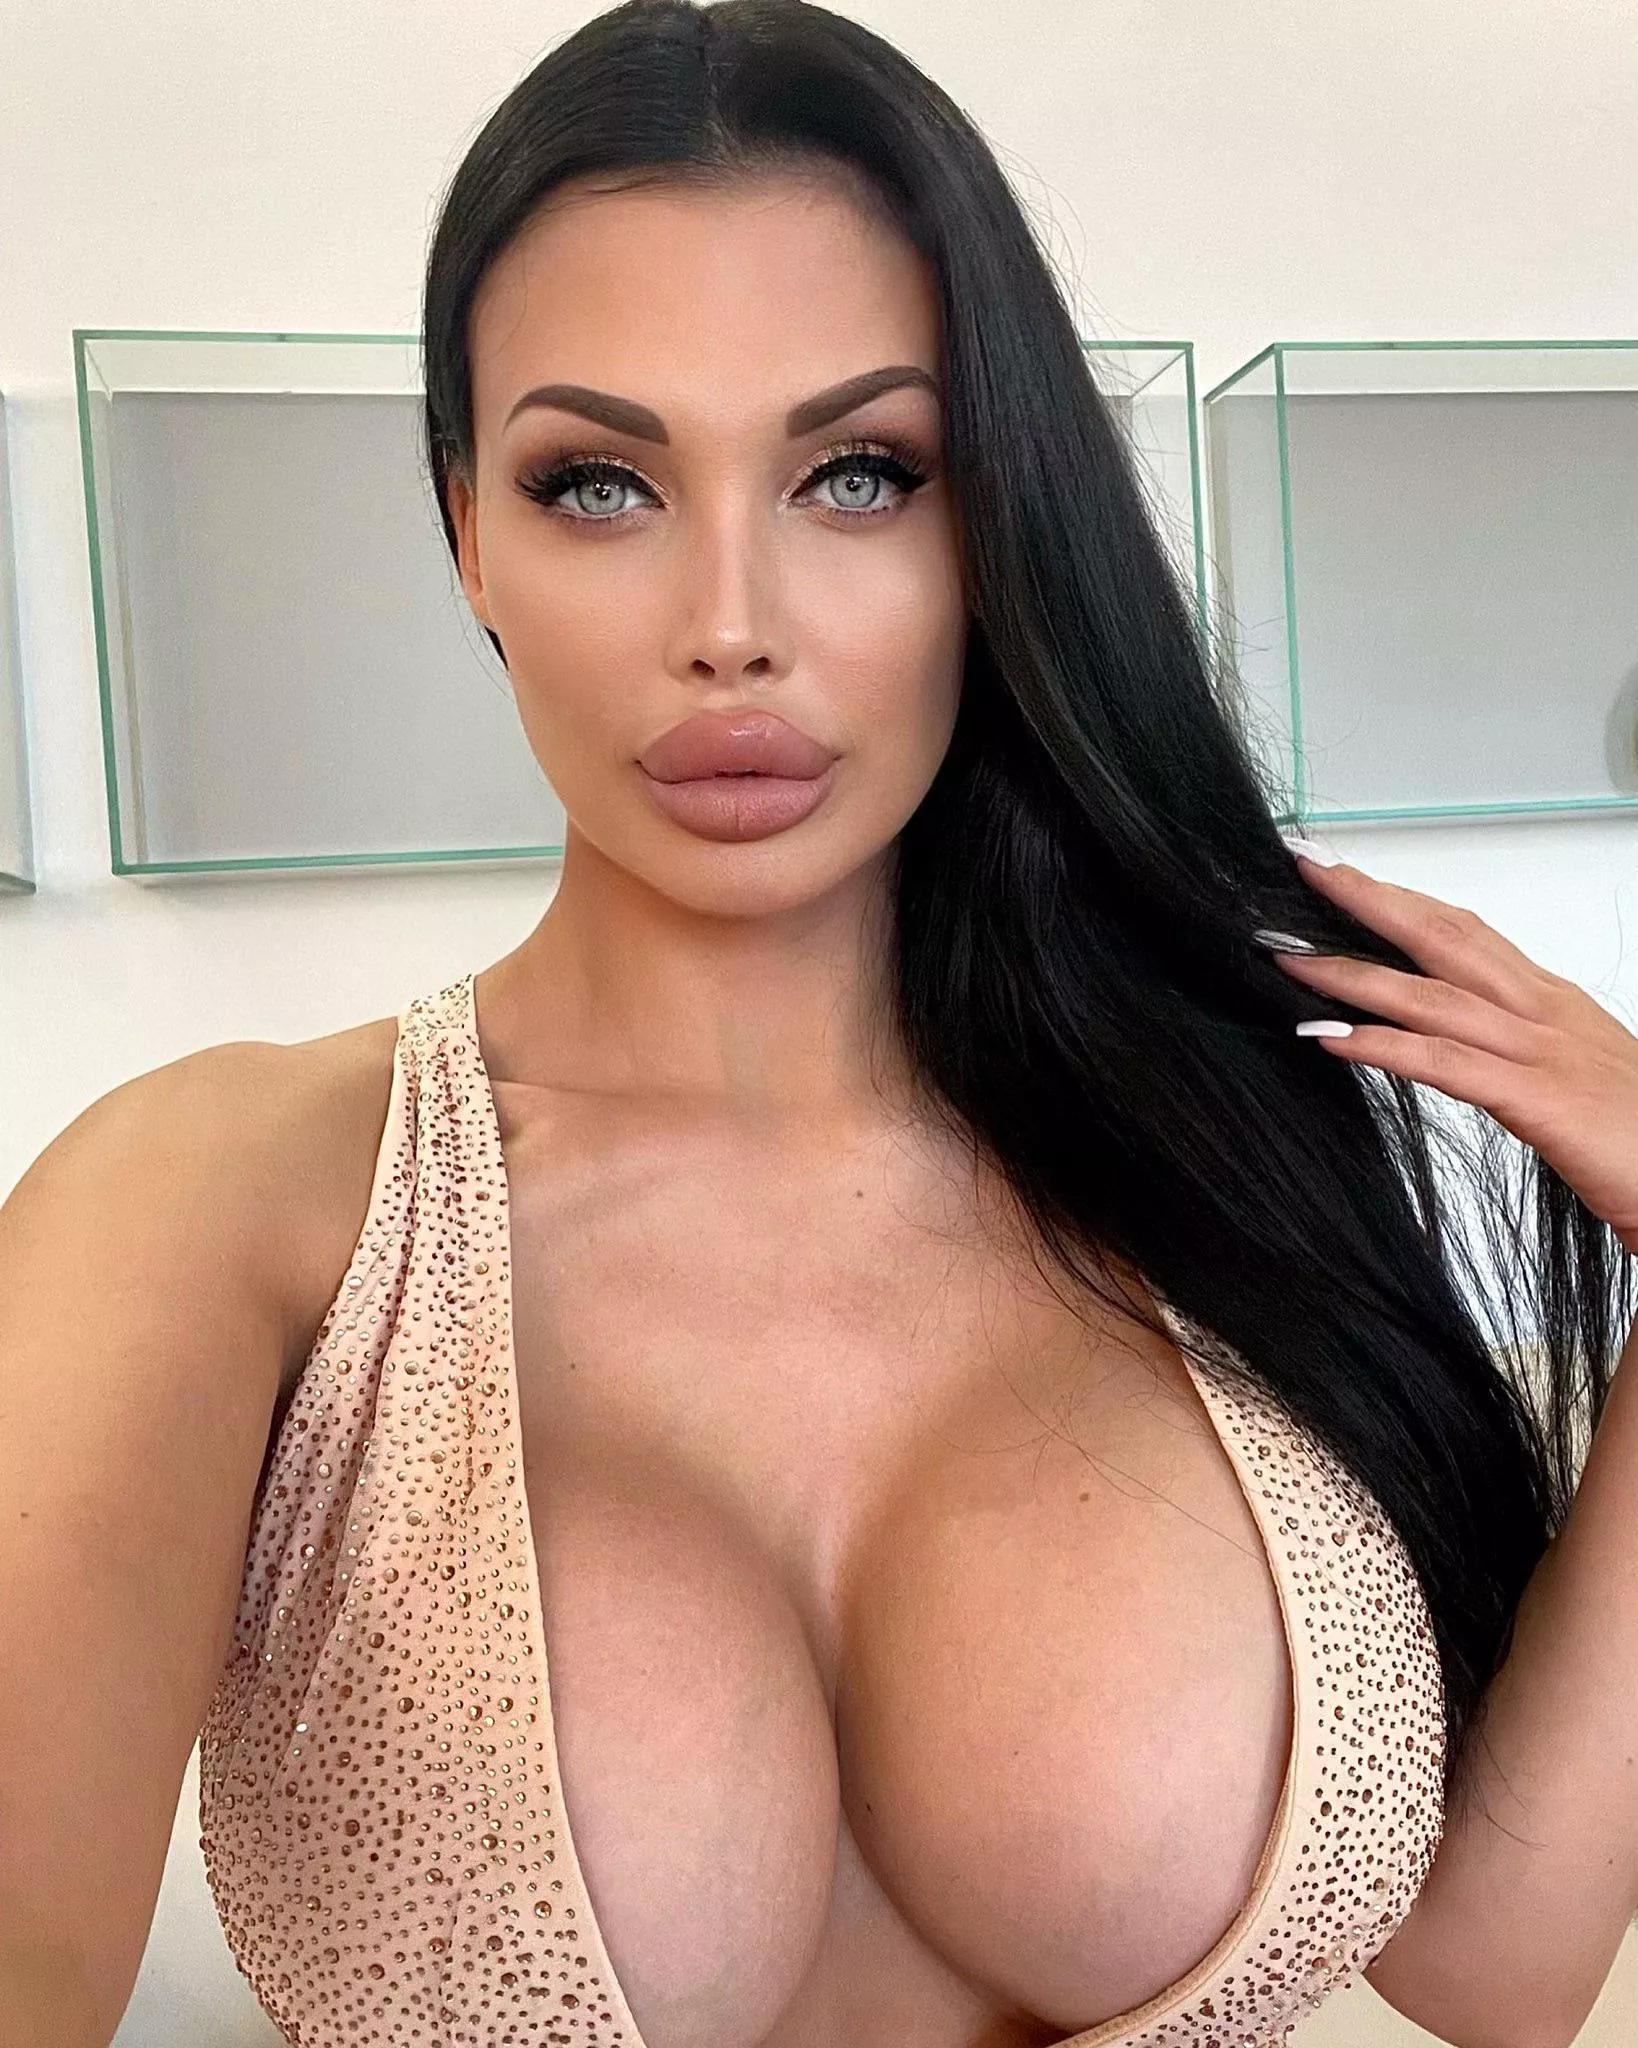 Aletta Ocean Is The Most Beautiful Woman In The World Who Agrees